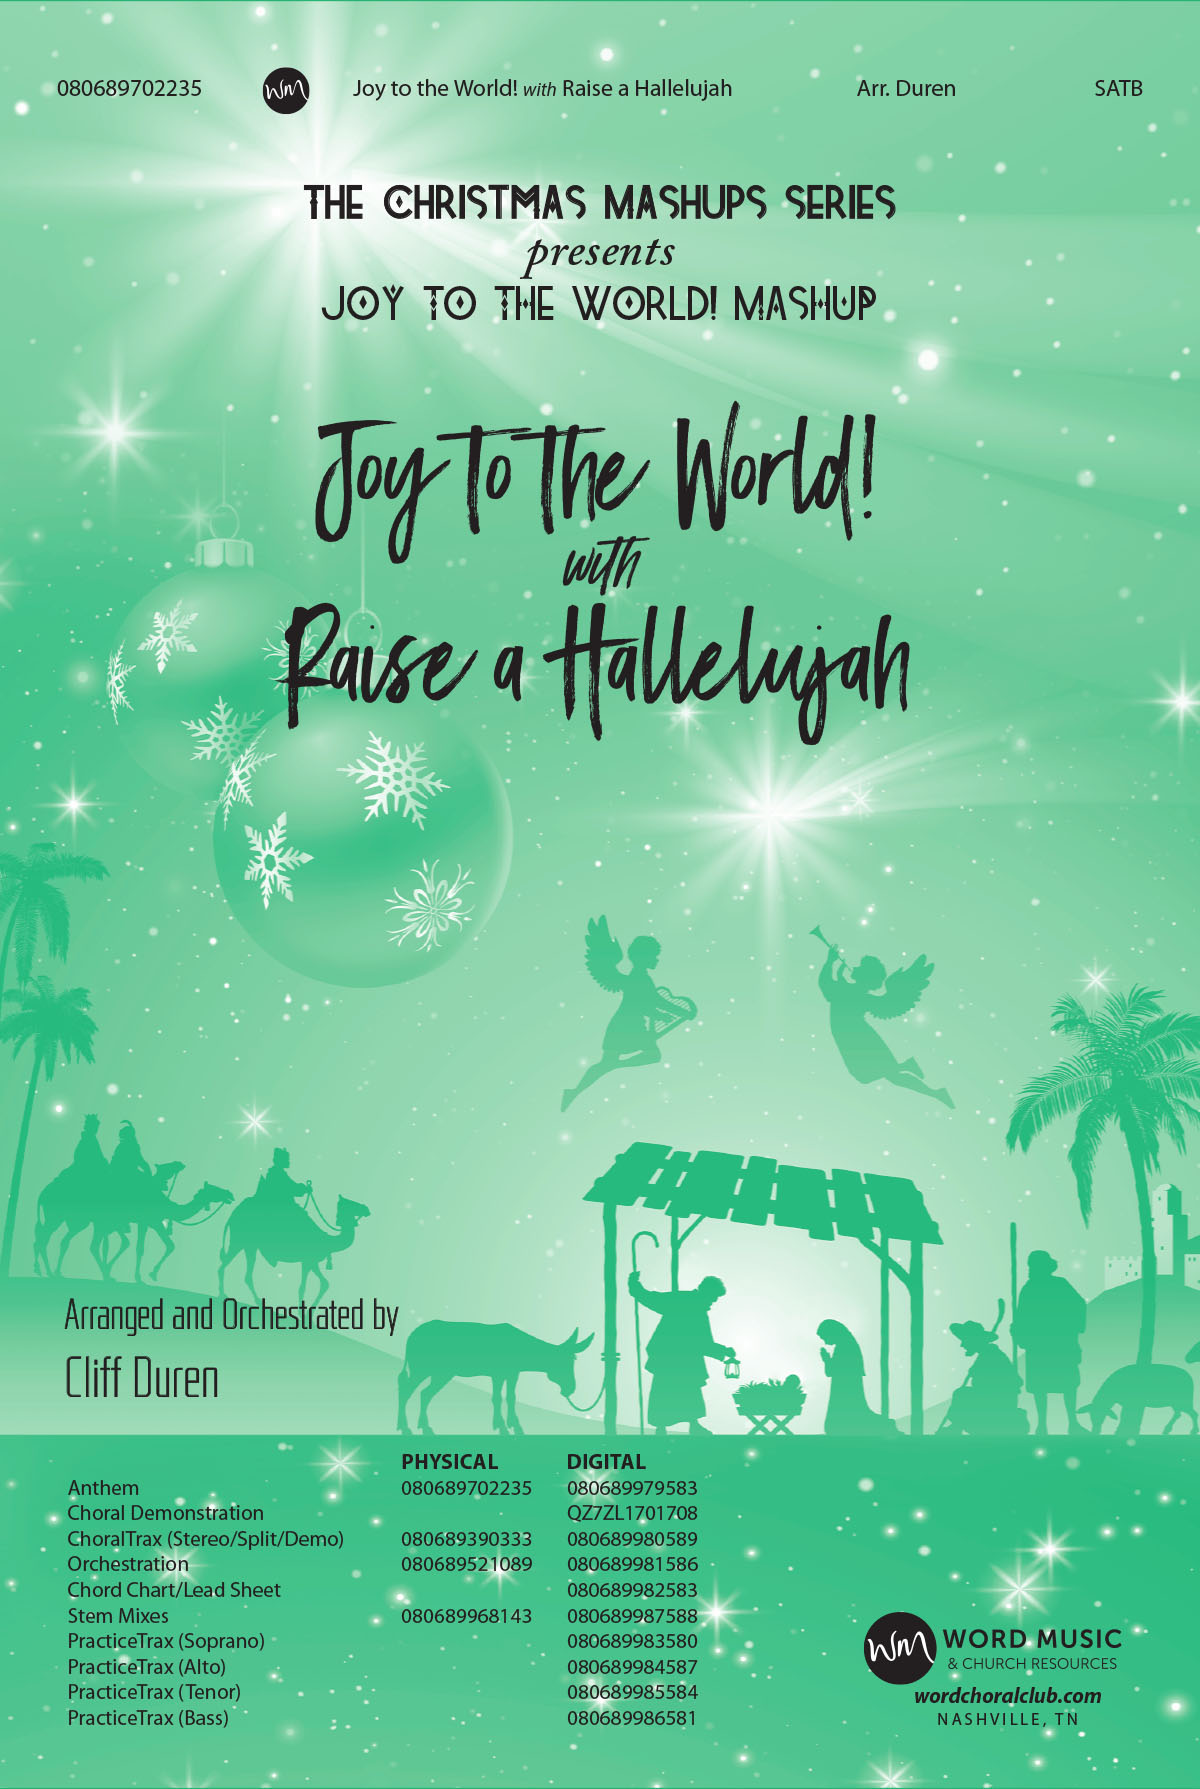 Joy to the World! with Raise a Hallelujah